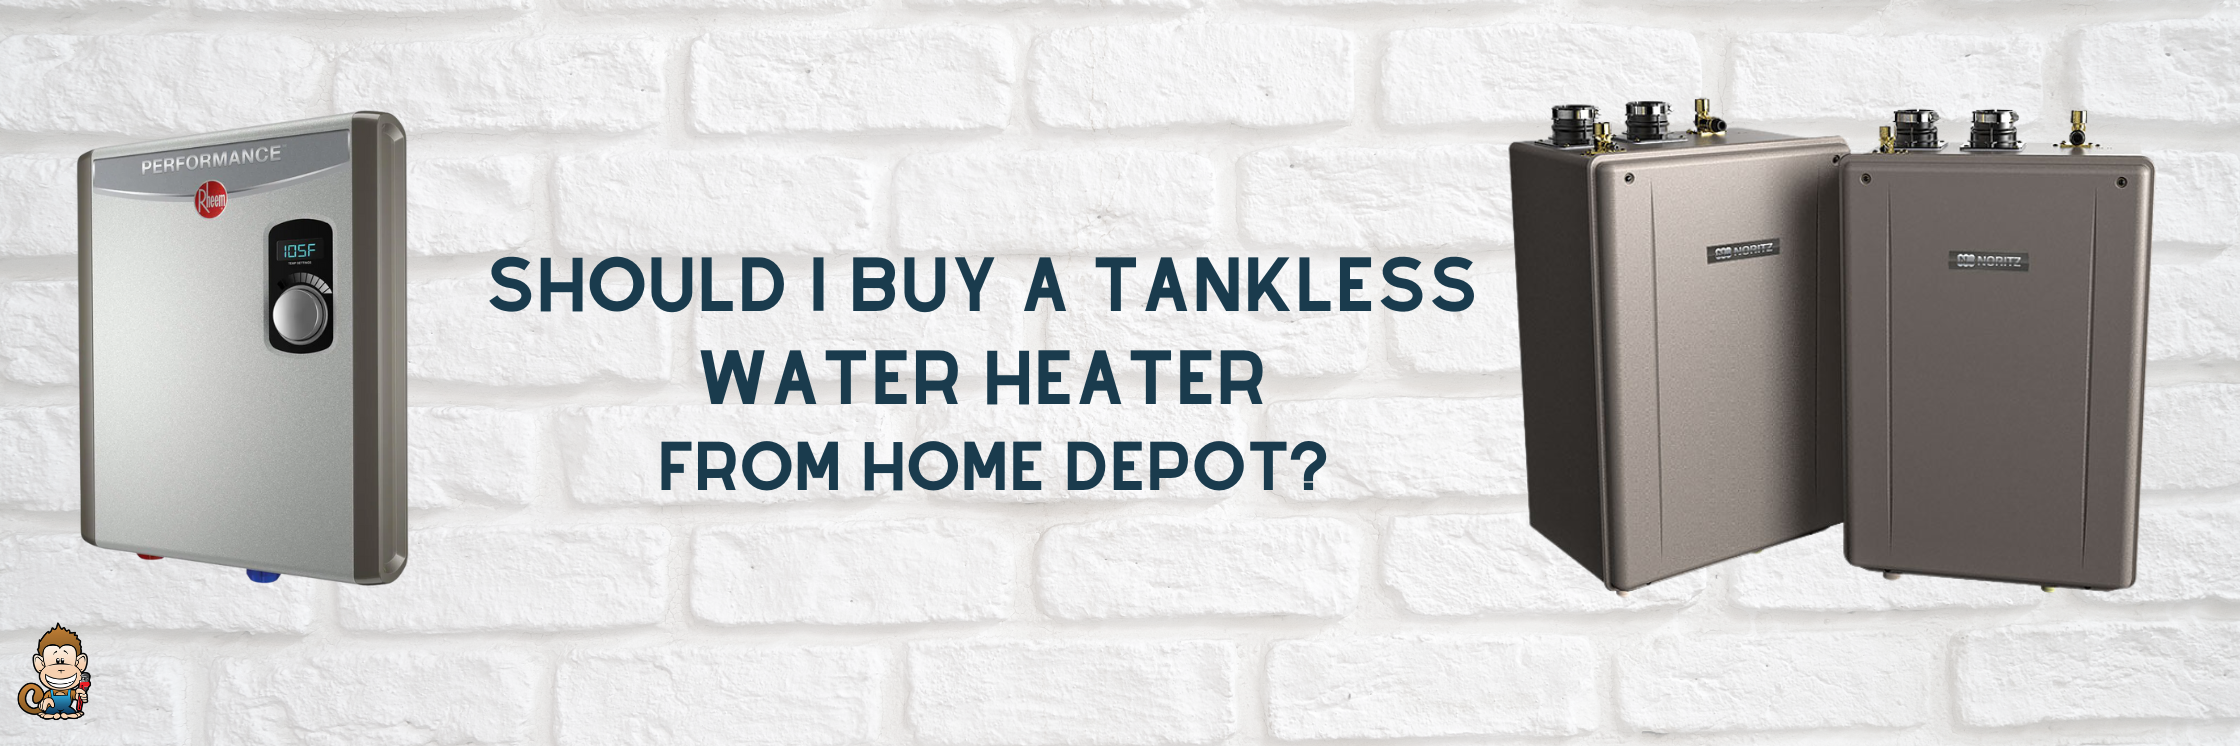 Should I Buy a Tankless Water Heater from Home Depot?